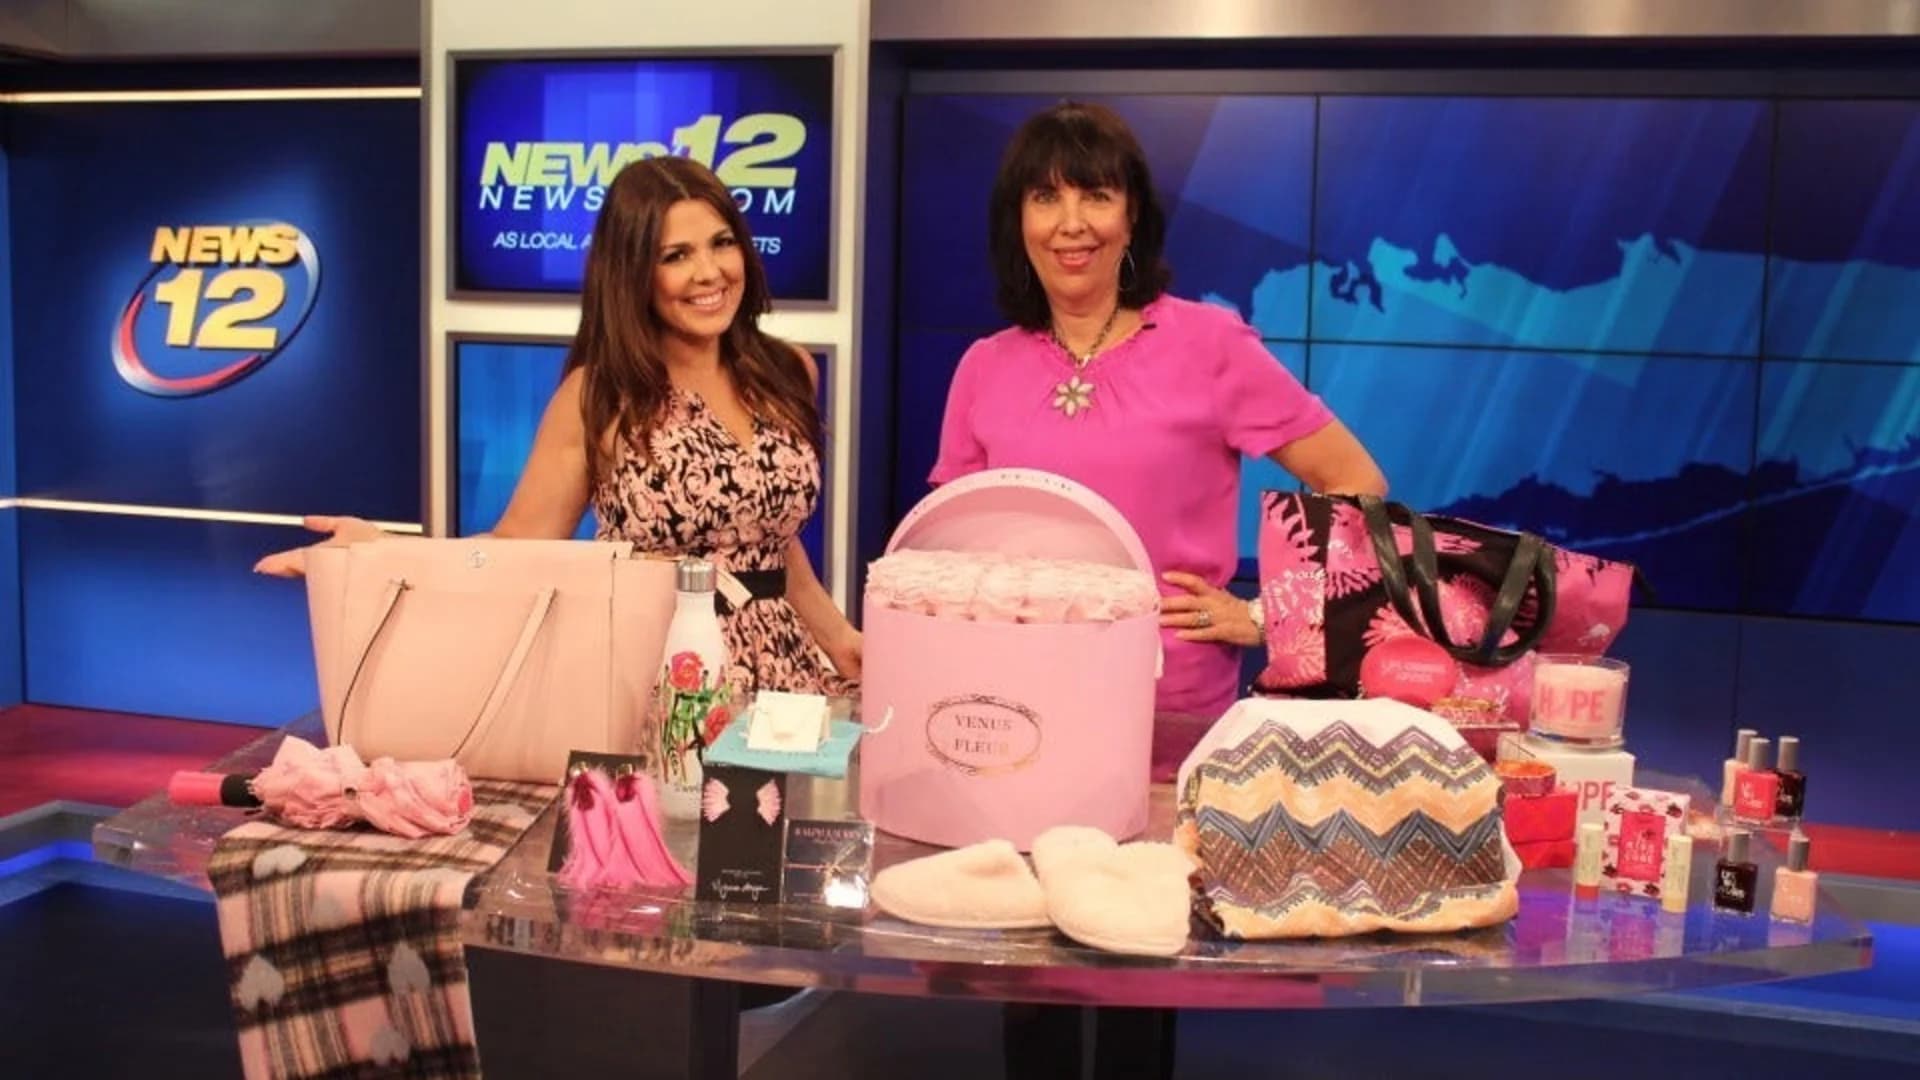 Think Pink: Products whose proceeds benefit breast cancer awareness